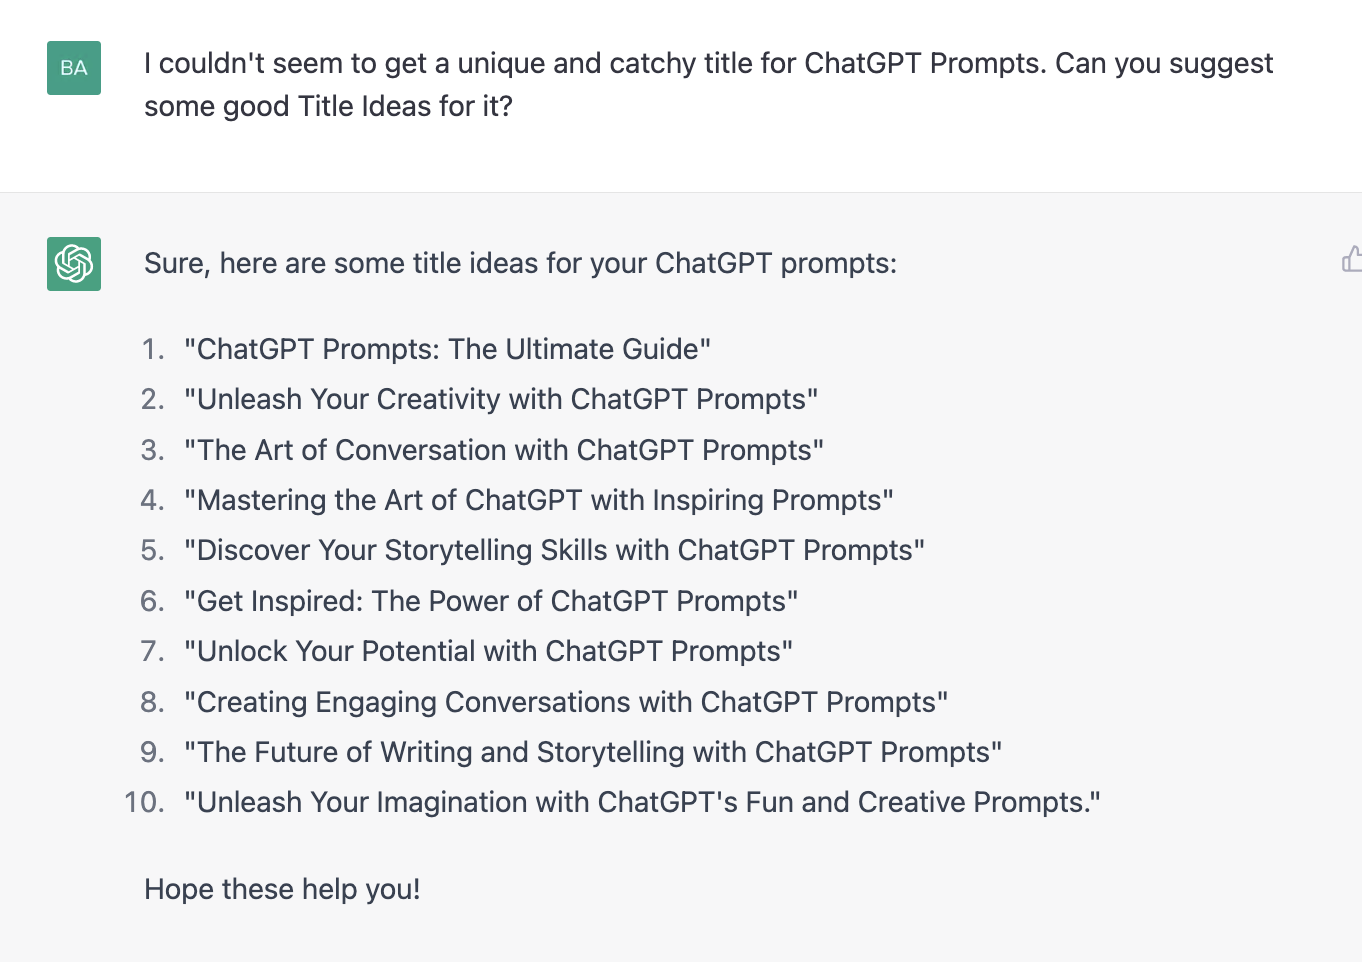 ChatGPT prompt about title ideas for chatGPT prompts